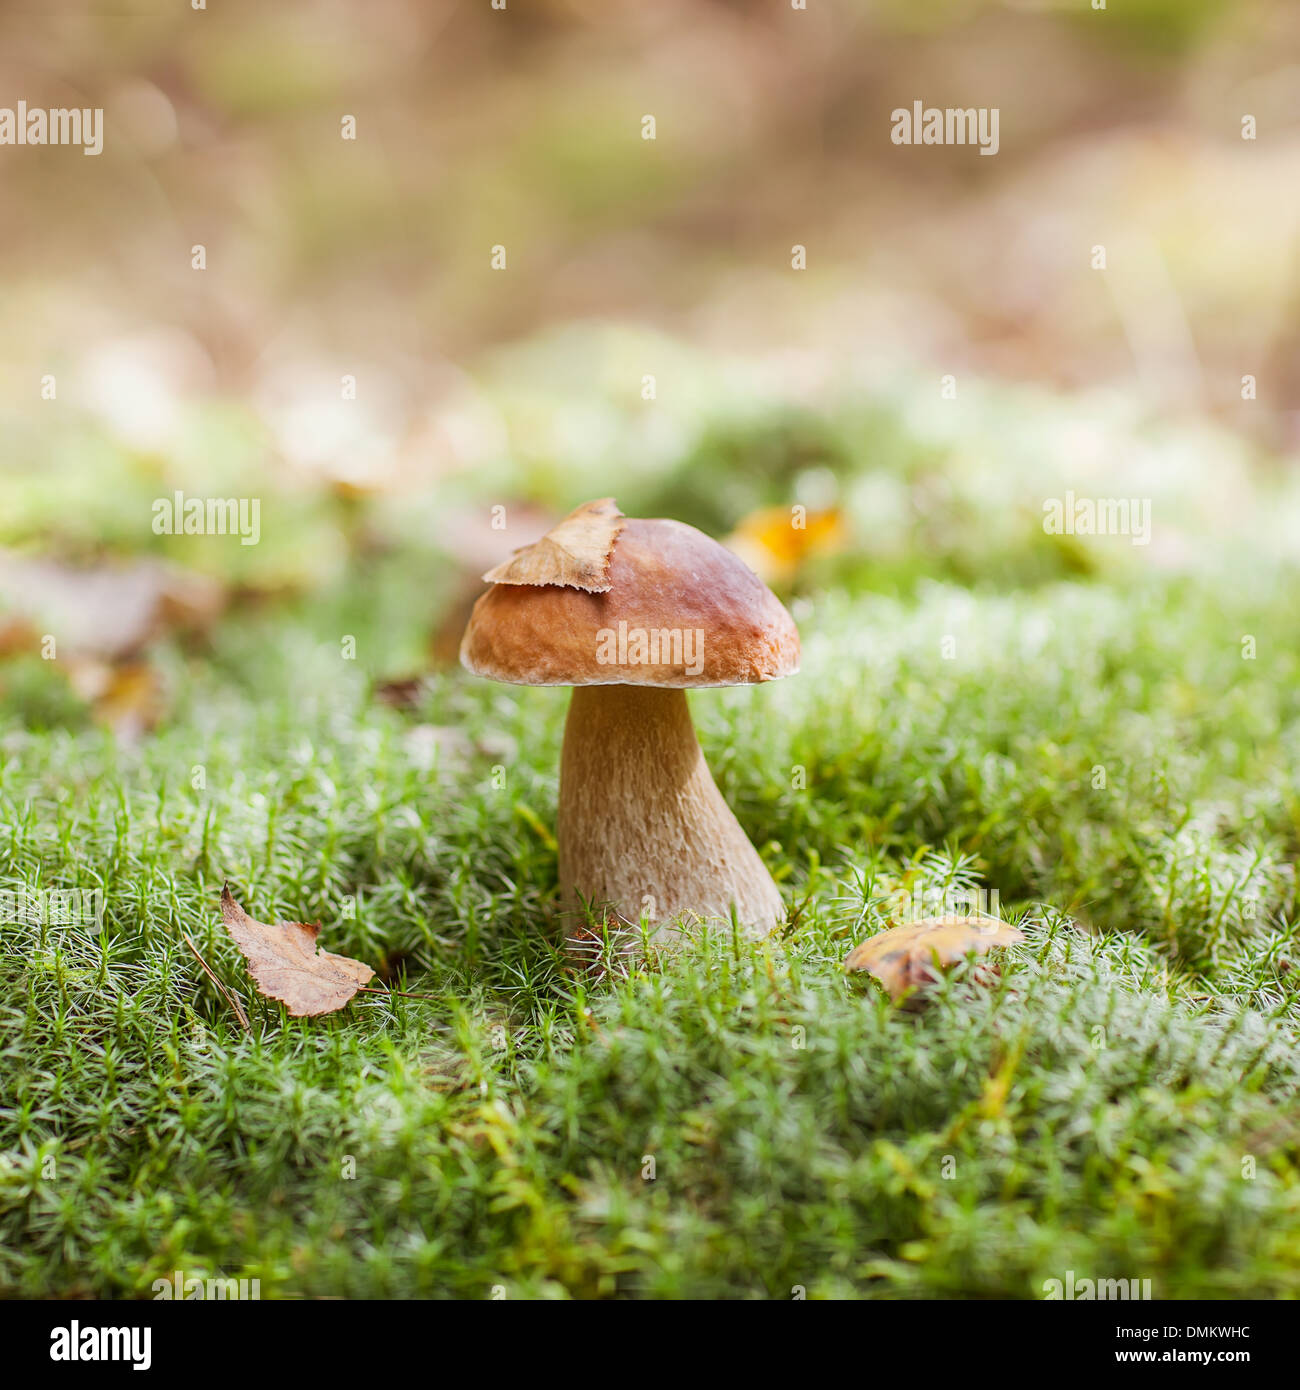 Mushrooms in the moss Stock Photo